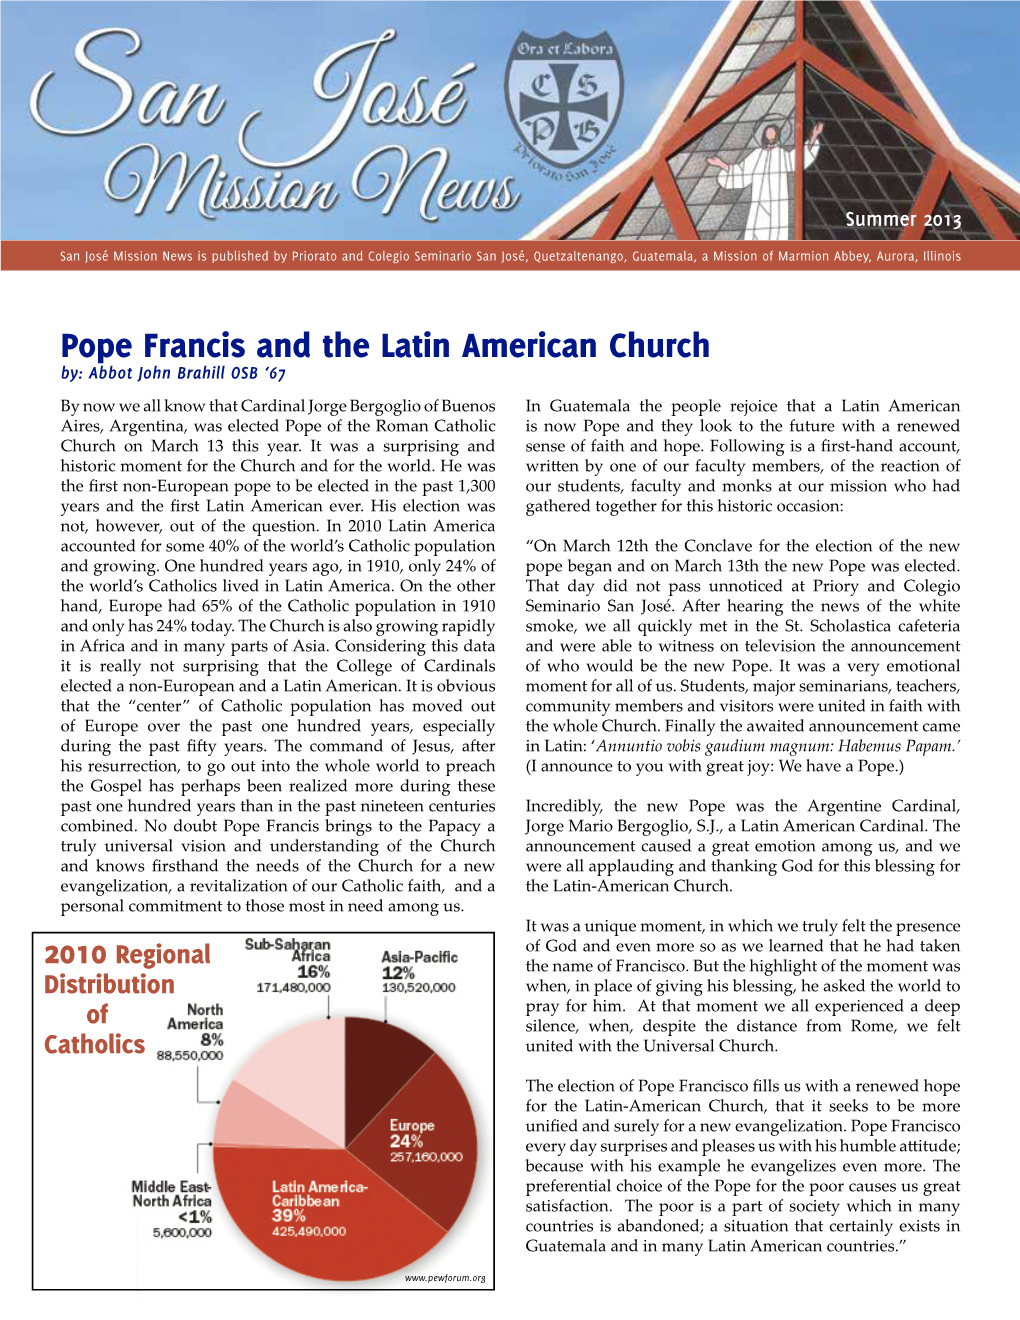 Pope Francis and the Latin American Church